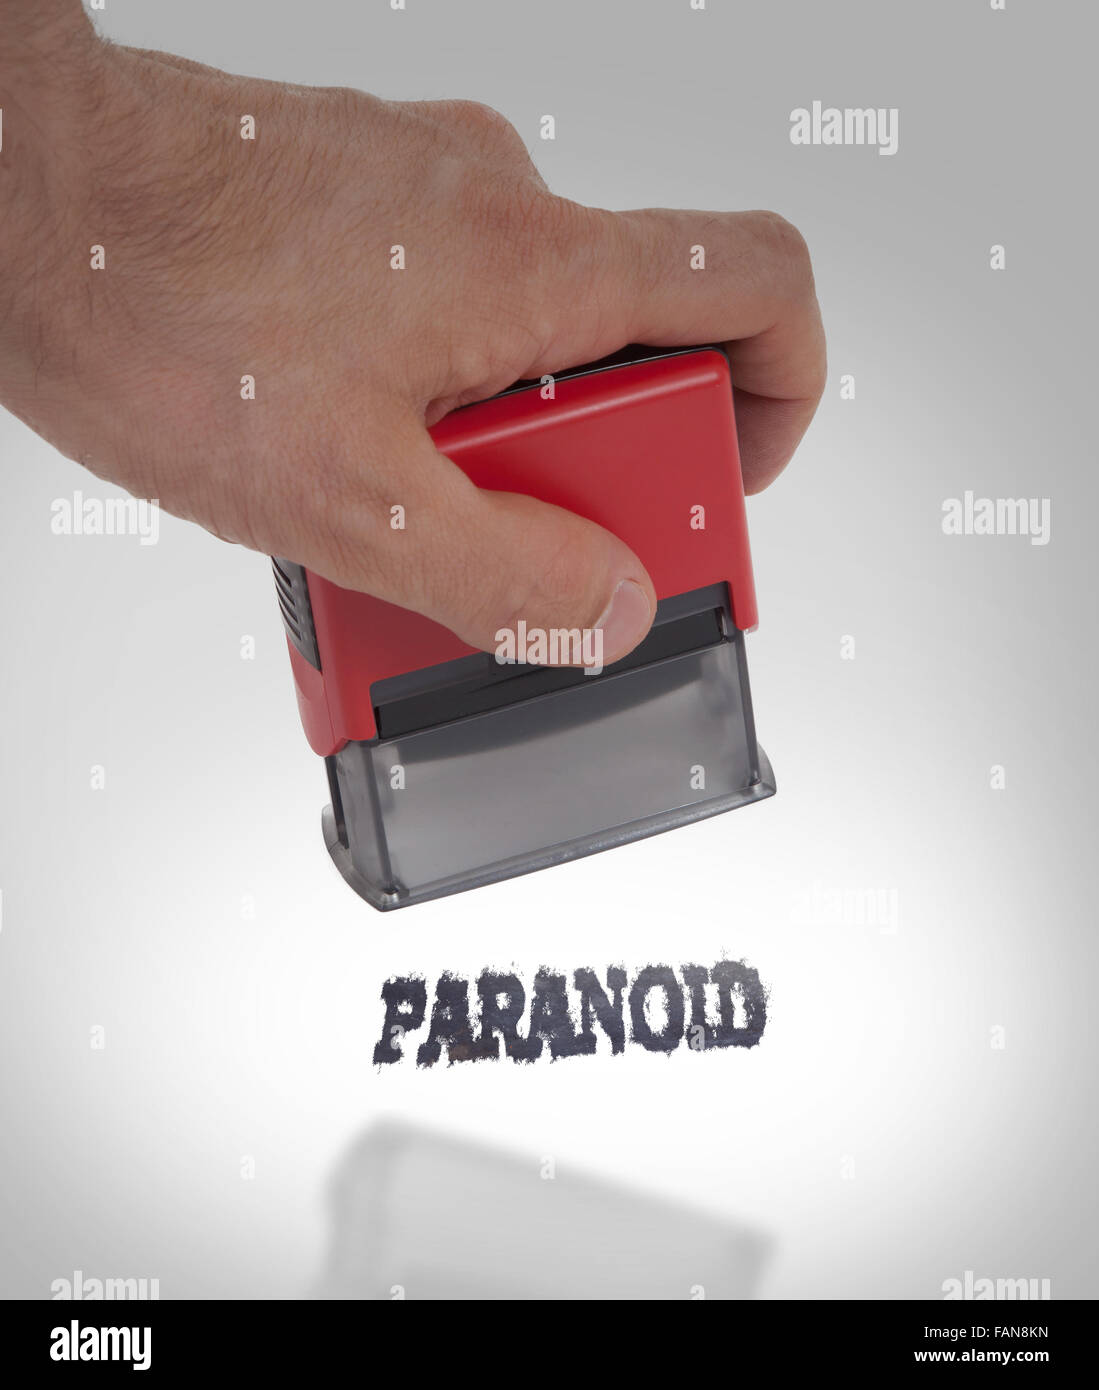 Plastic stamp in hand, isolated on white - Paranoid Stock Photo